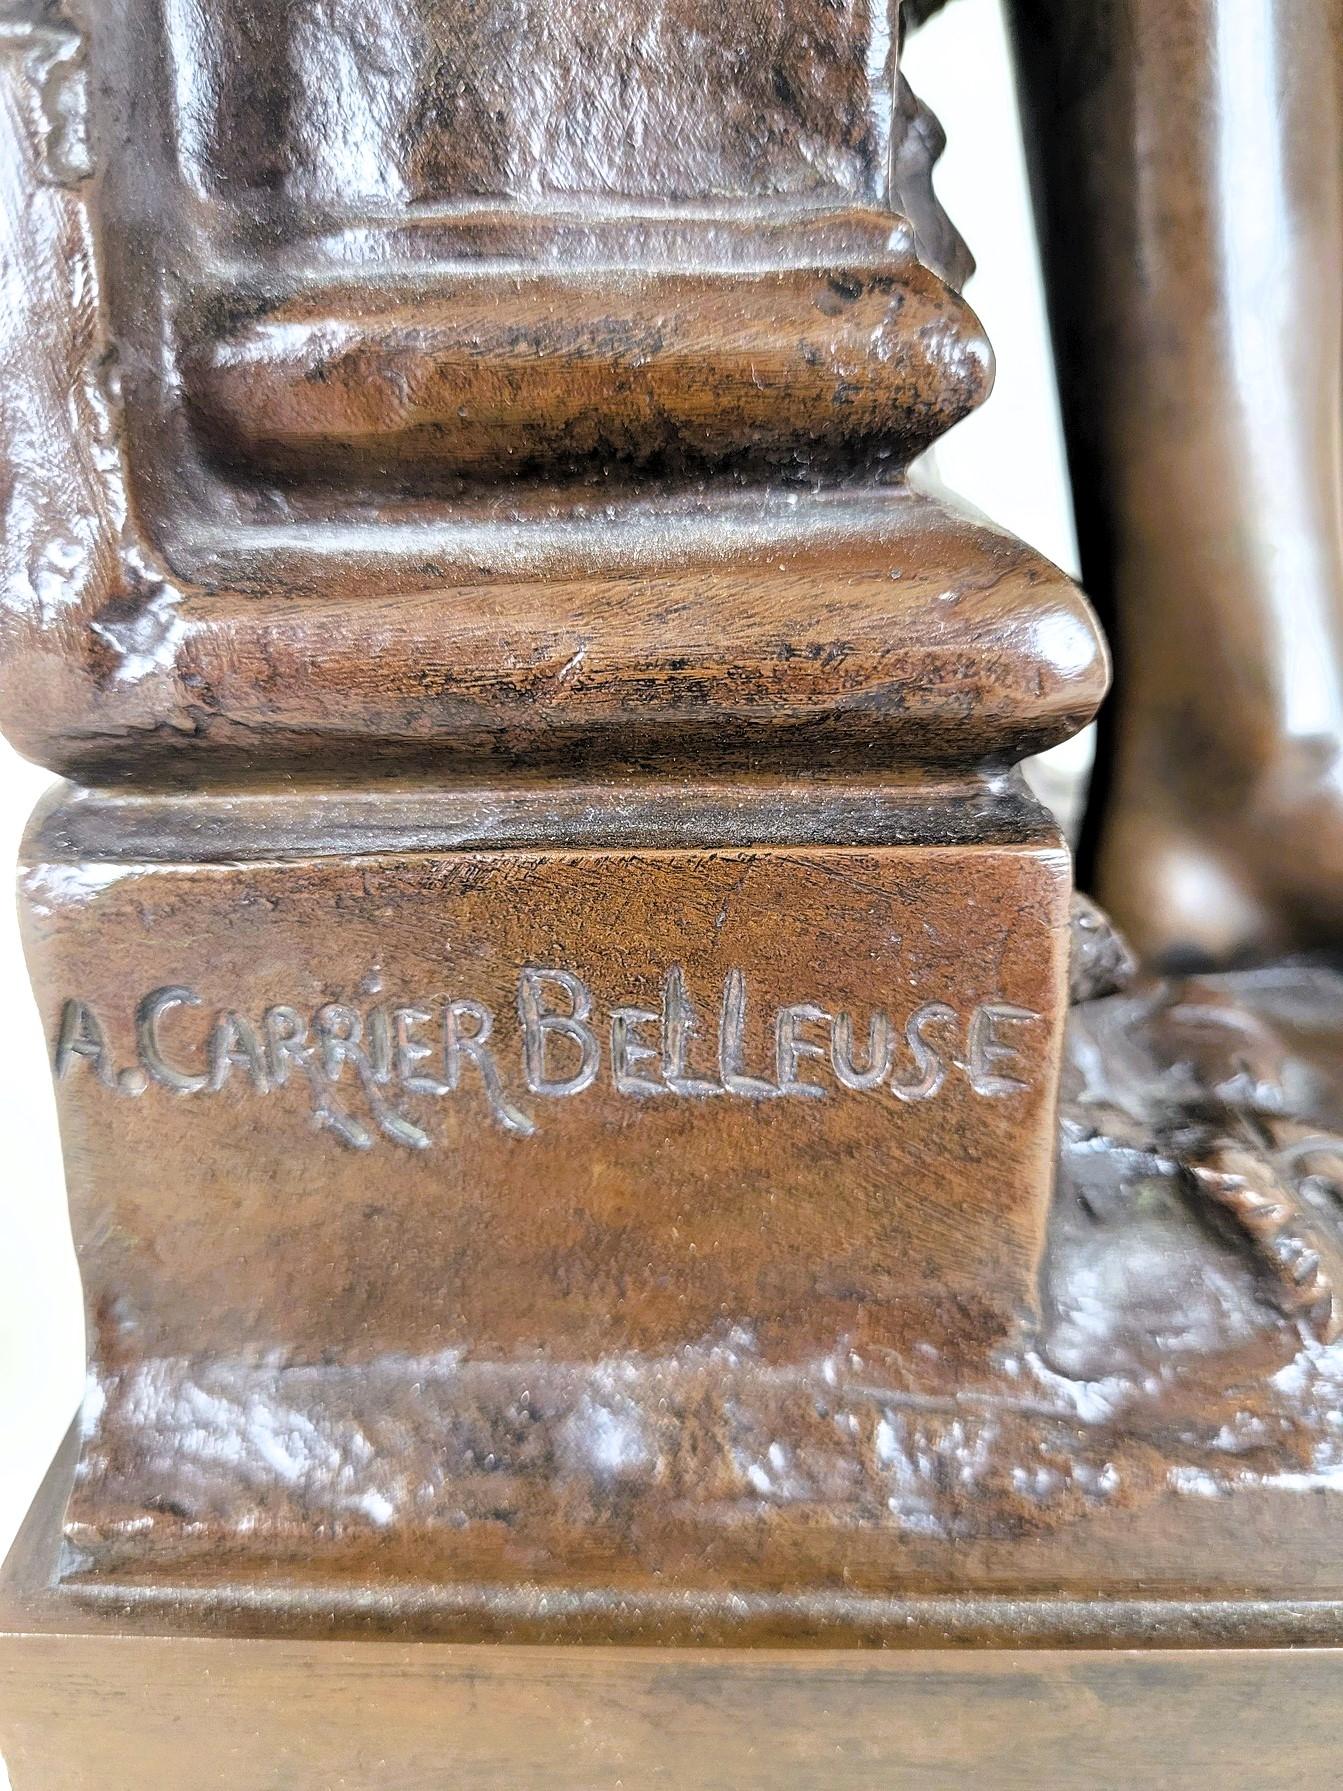 Carrier-belleuse, Cigale, Large Signed Bronze, 19th Century For Sale 4